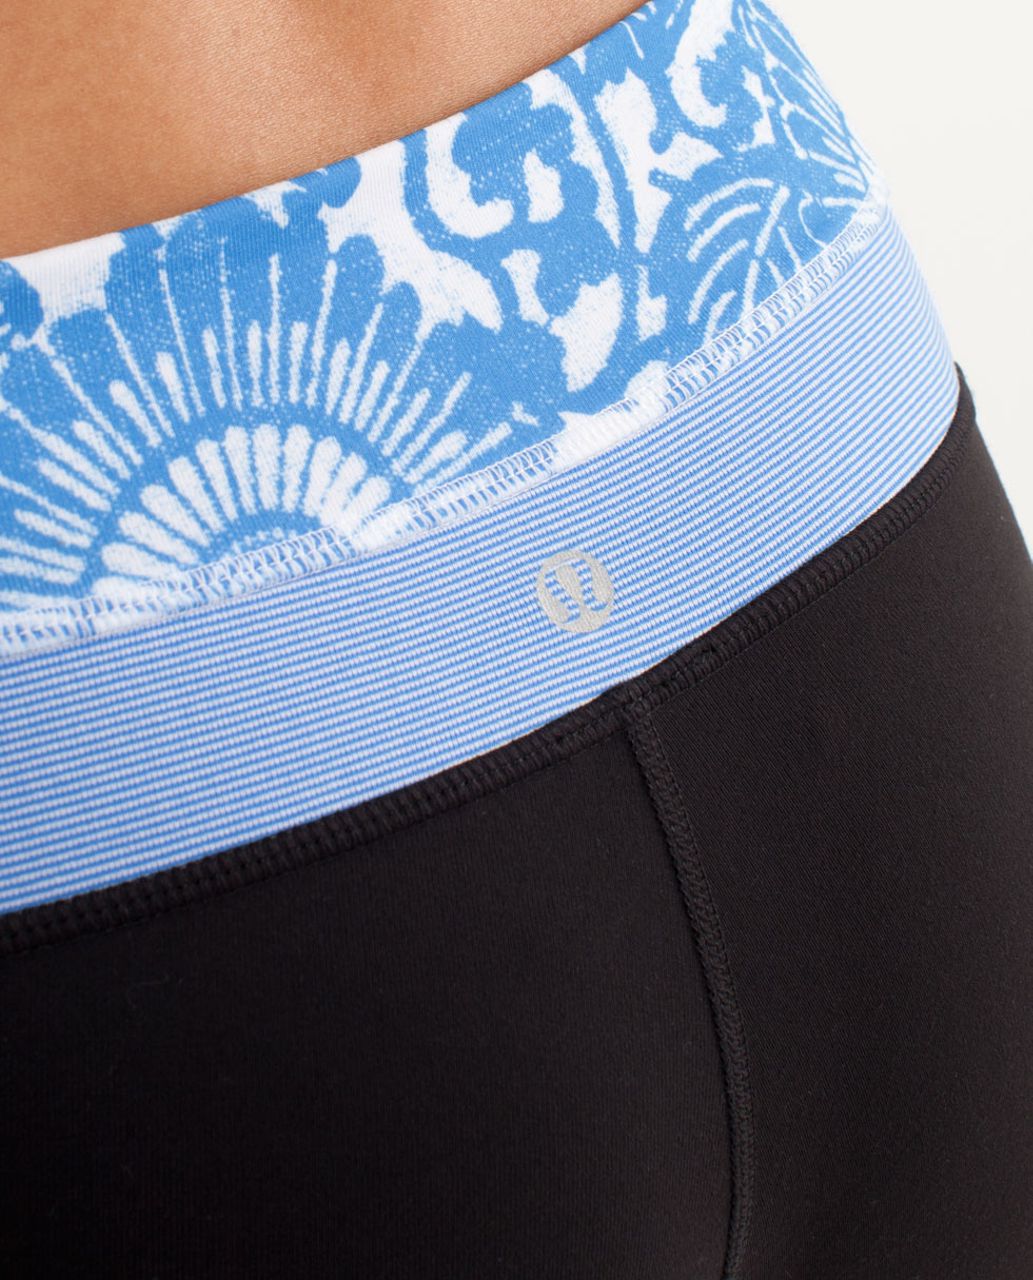 Lululemon Groove Pant (Tall) - Black /  Beachy Floral White Porcelaine /  Wee Stripe White Porcelaine